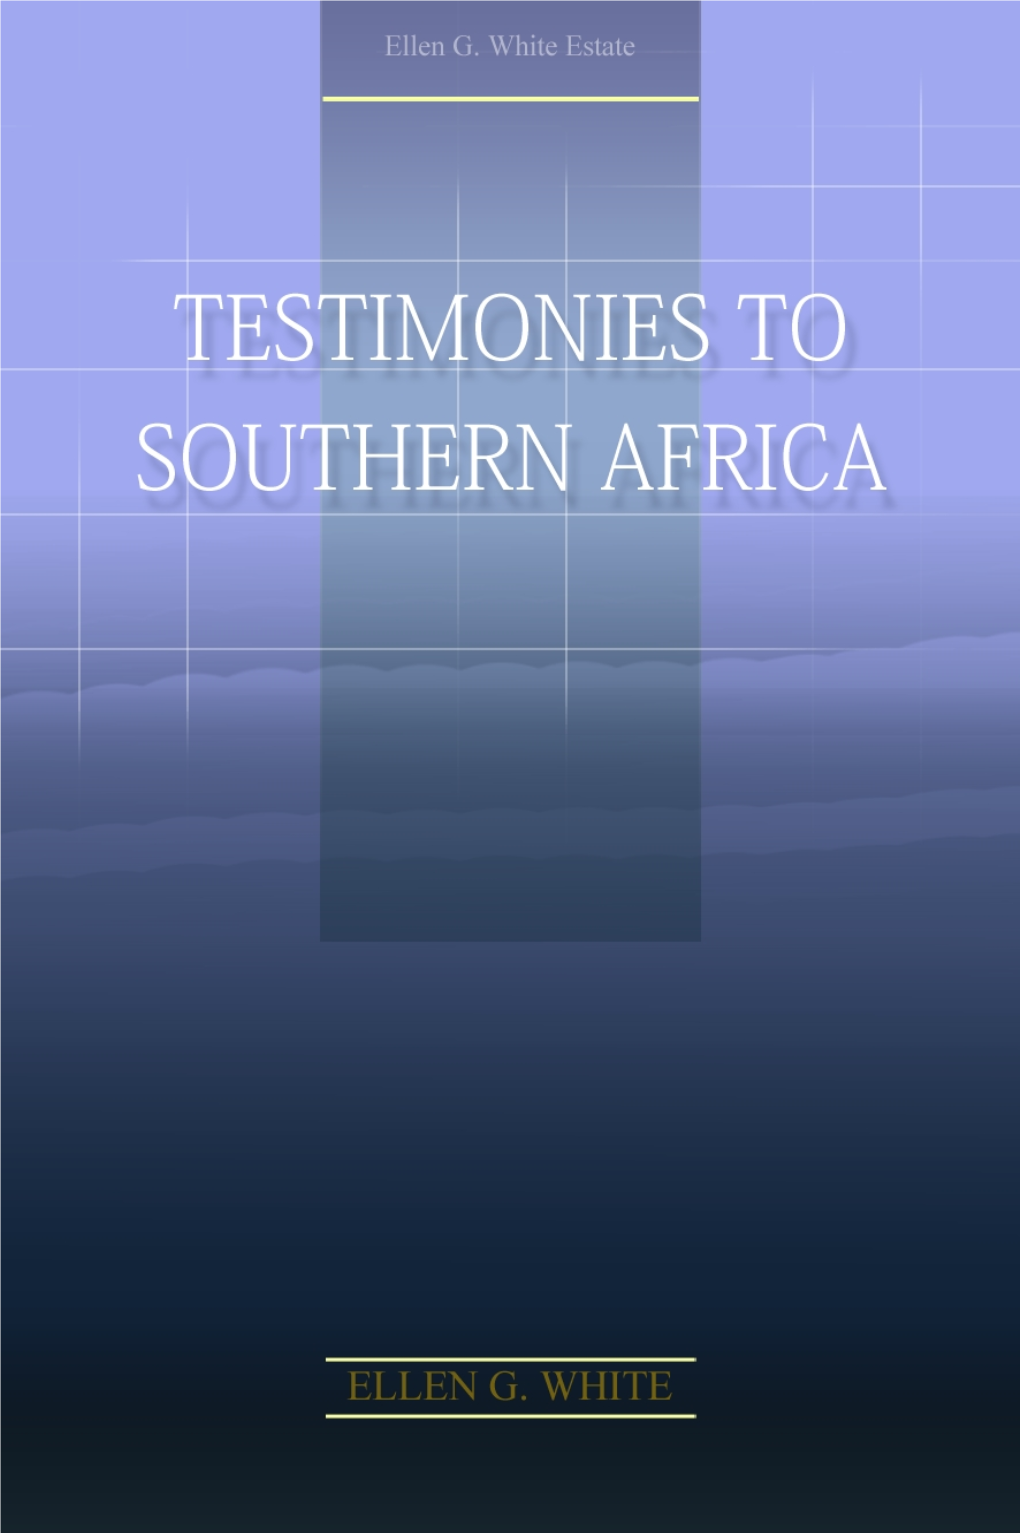 Testimonies to Southern Africa by Ellen G. White